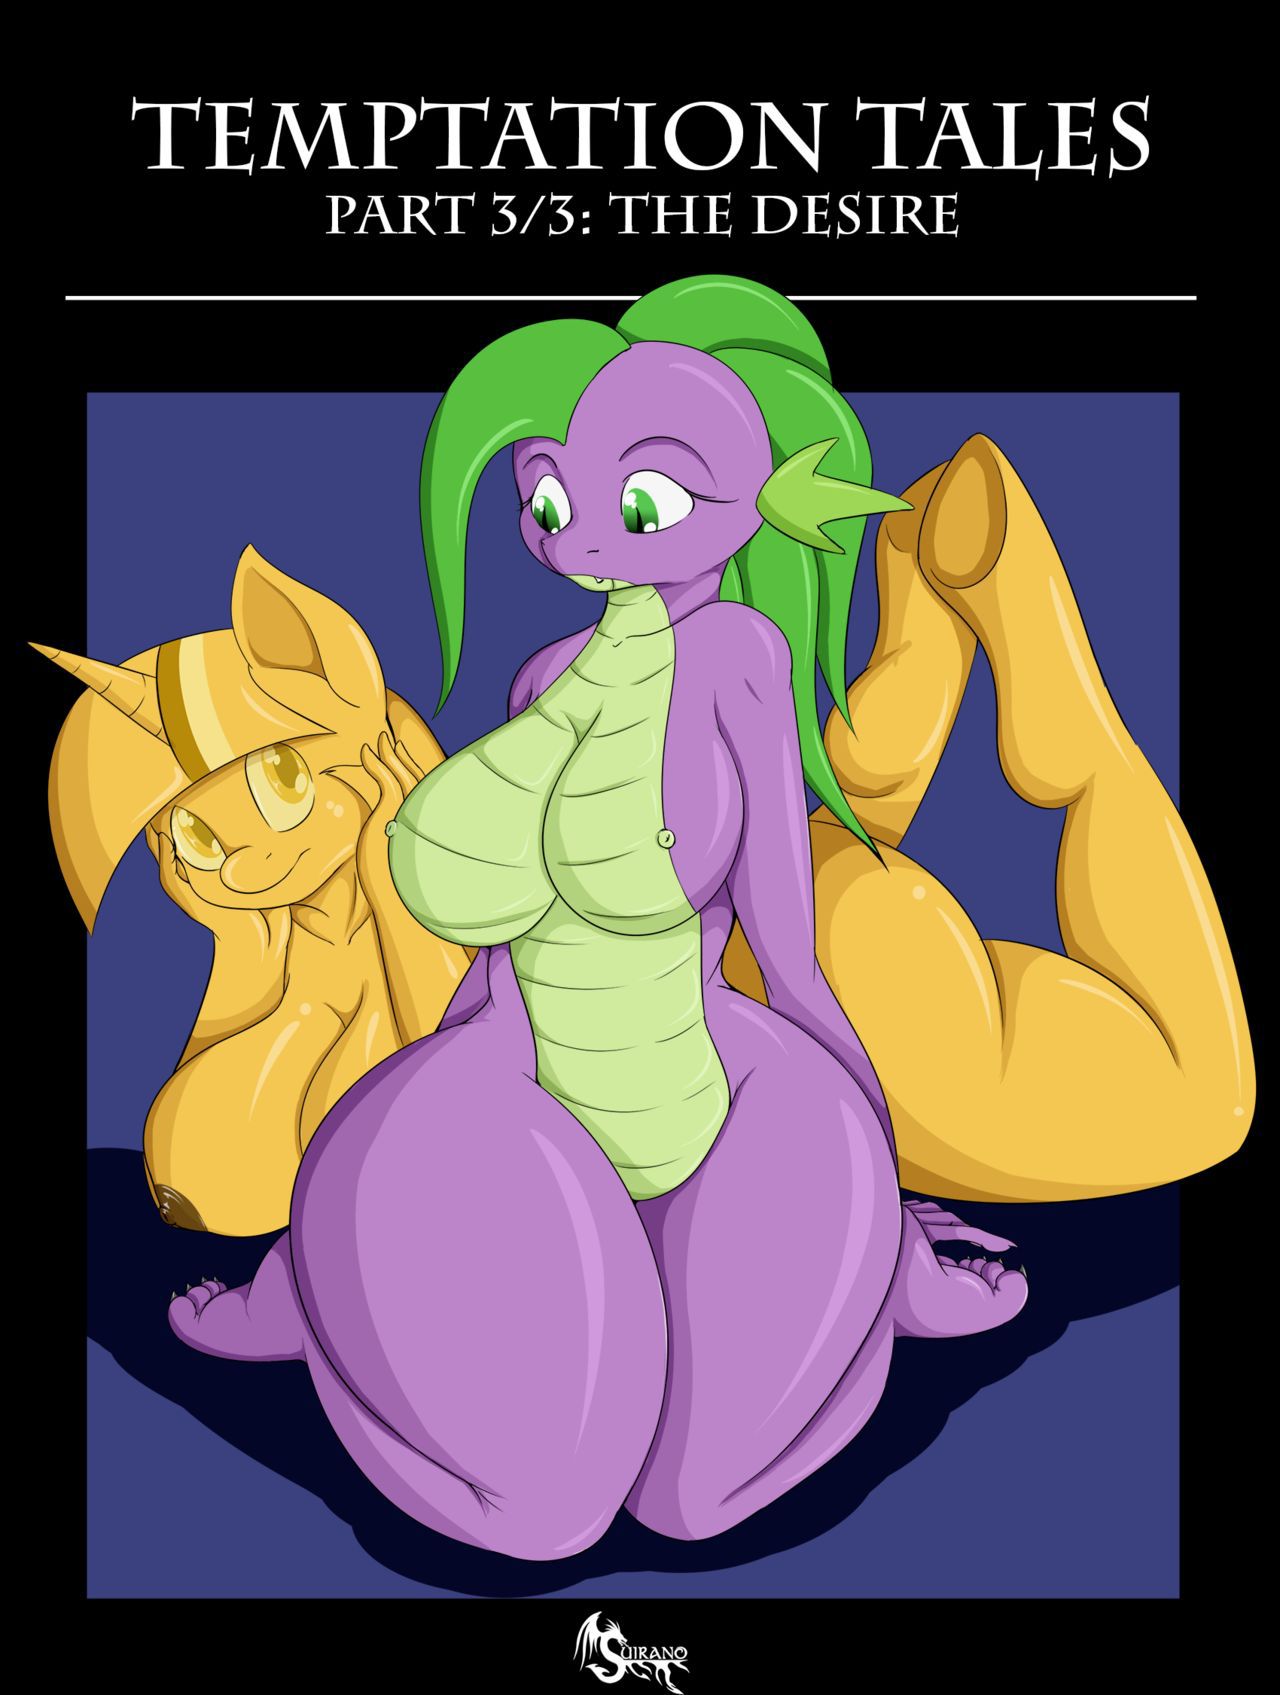 Temptation Tales (Part 3) - The Desire by Suirano 1